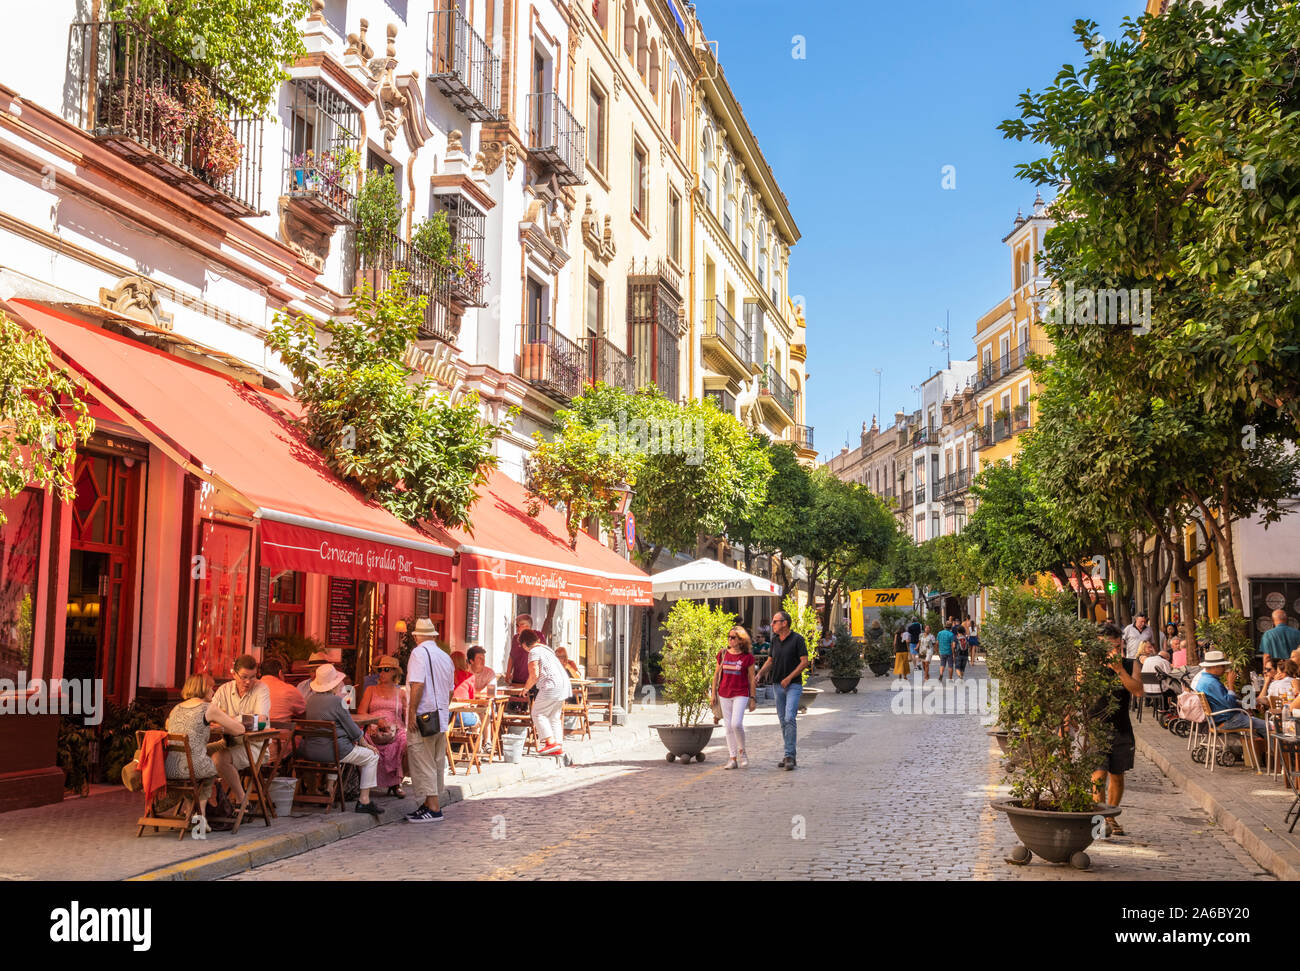 Seville Calle Mateos Gago Street, people eating outside cafes and restaurants Seville centre Sevilla Seville Spain Seville Andalusia Spain EU Europe08 Stock Photo